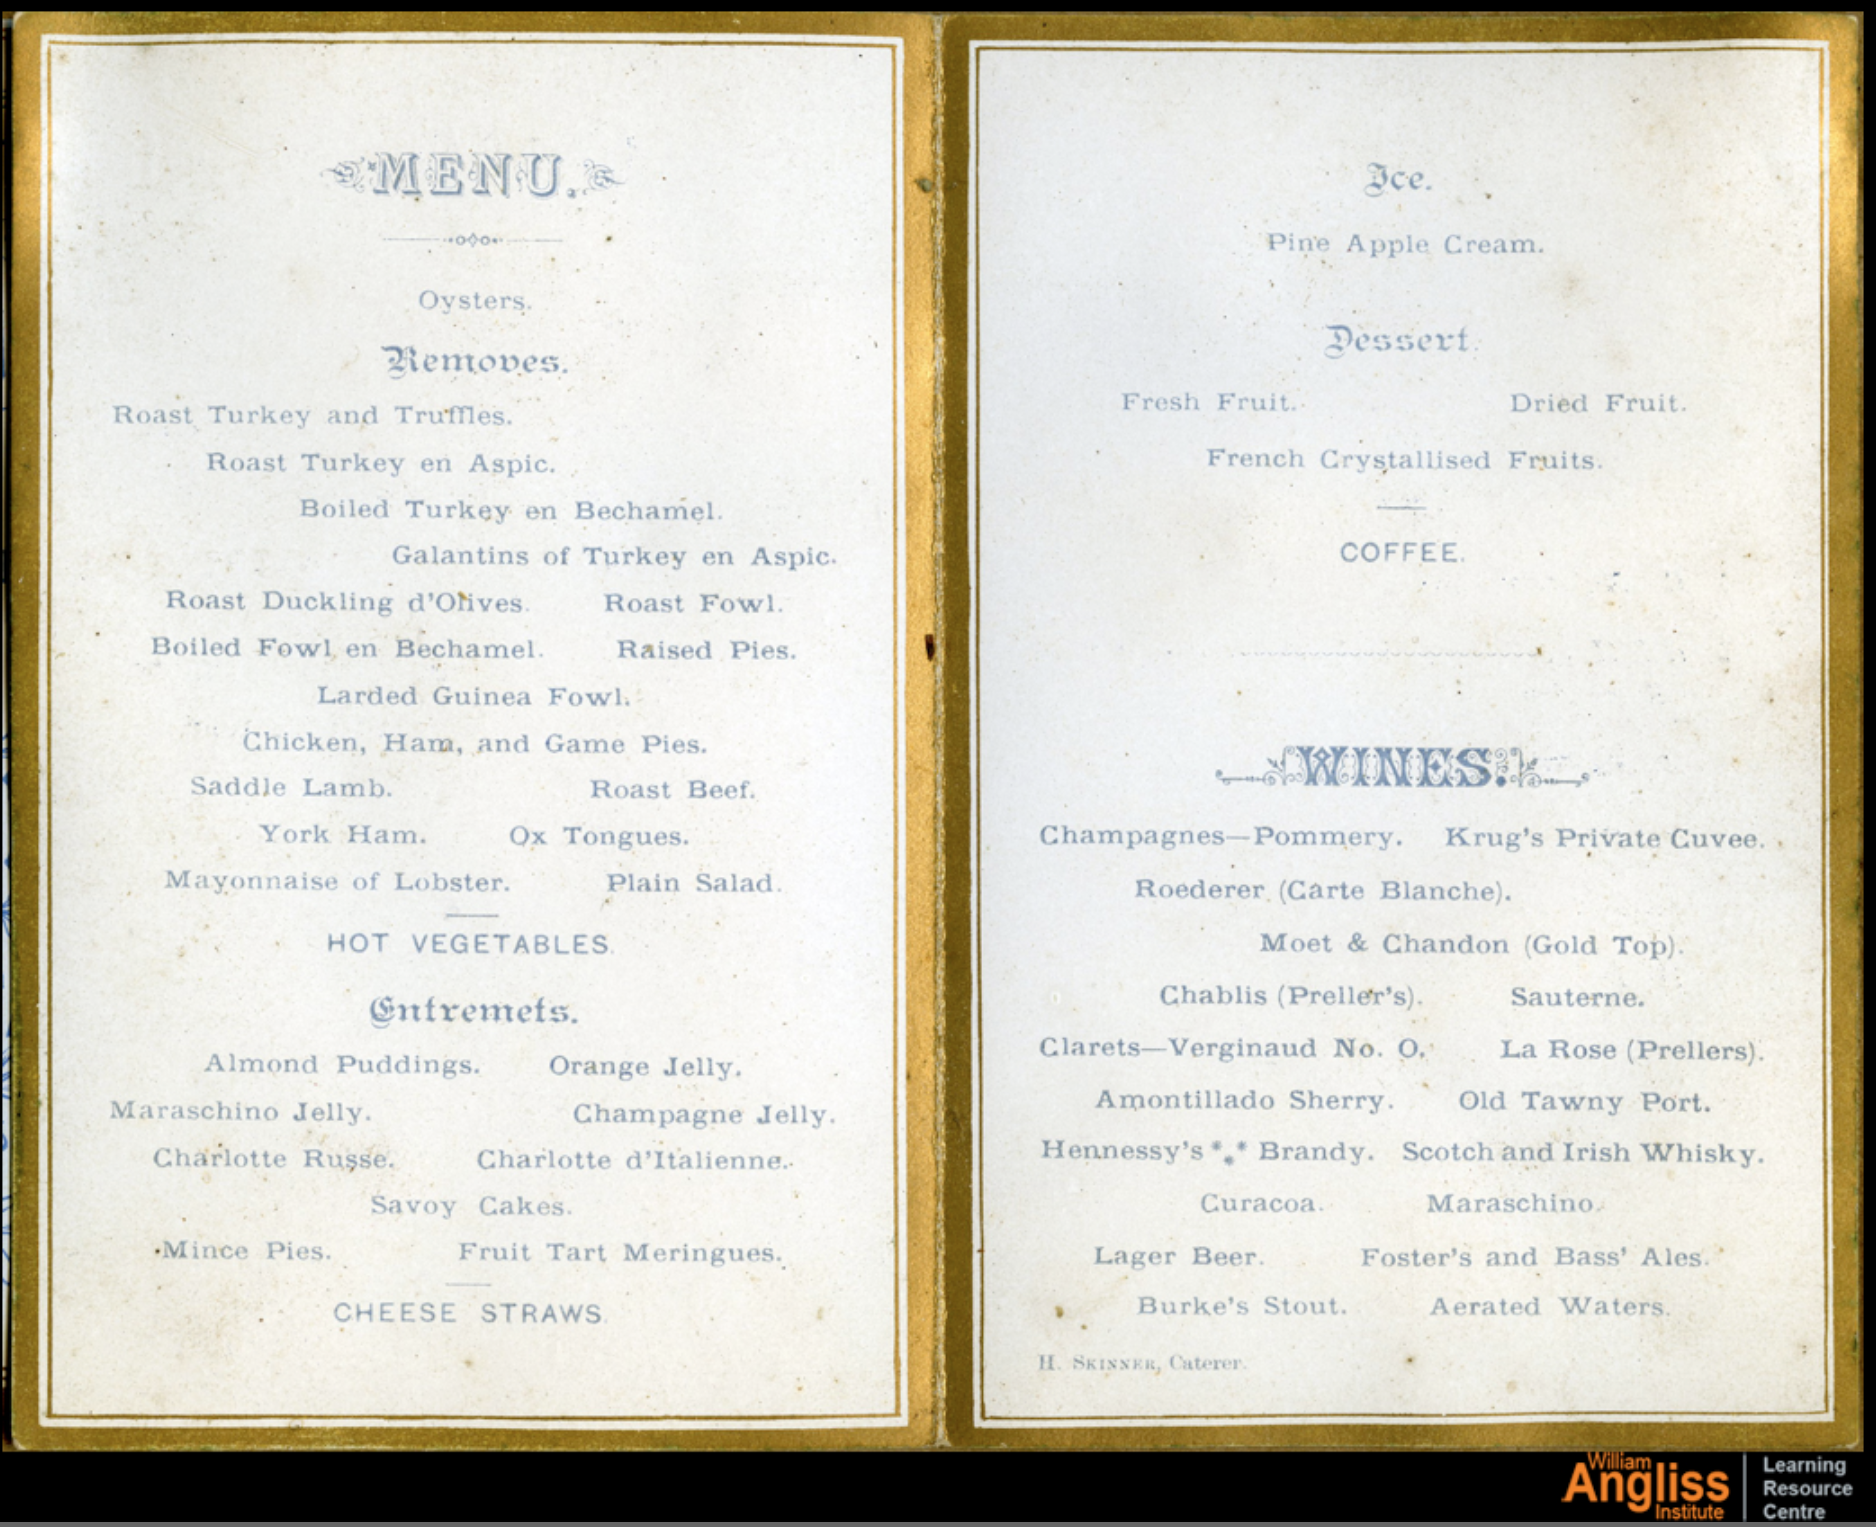 Banquet menu Given By A. Aitken, Esq., President of The Fitzroy Bowling Green, In Honor of The Visit Of The Malmsbury Bowlers, 1887